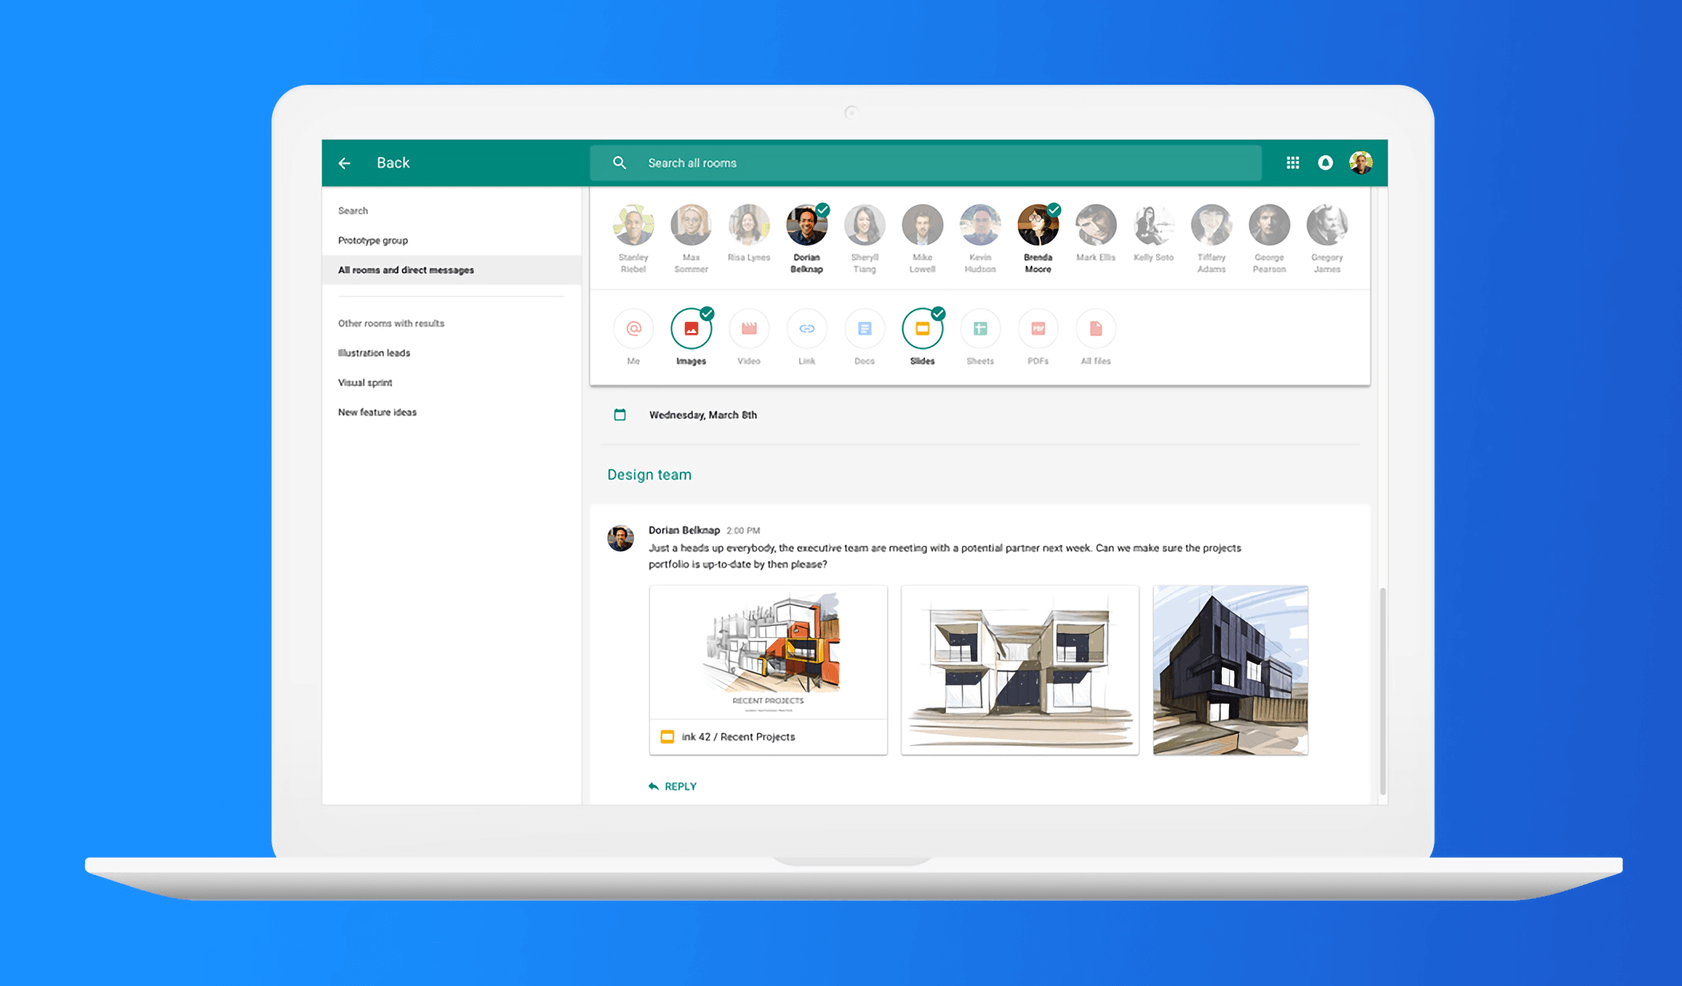 Google Hangouts to be officially retired in October